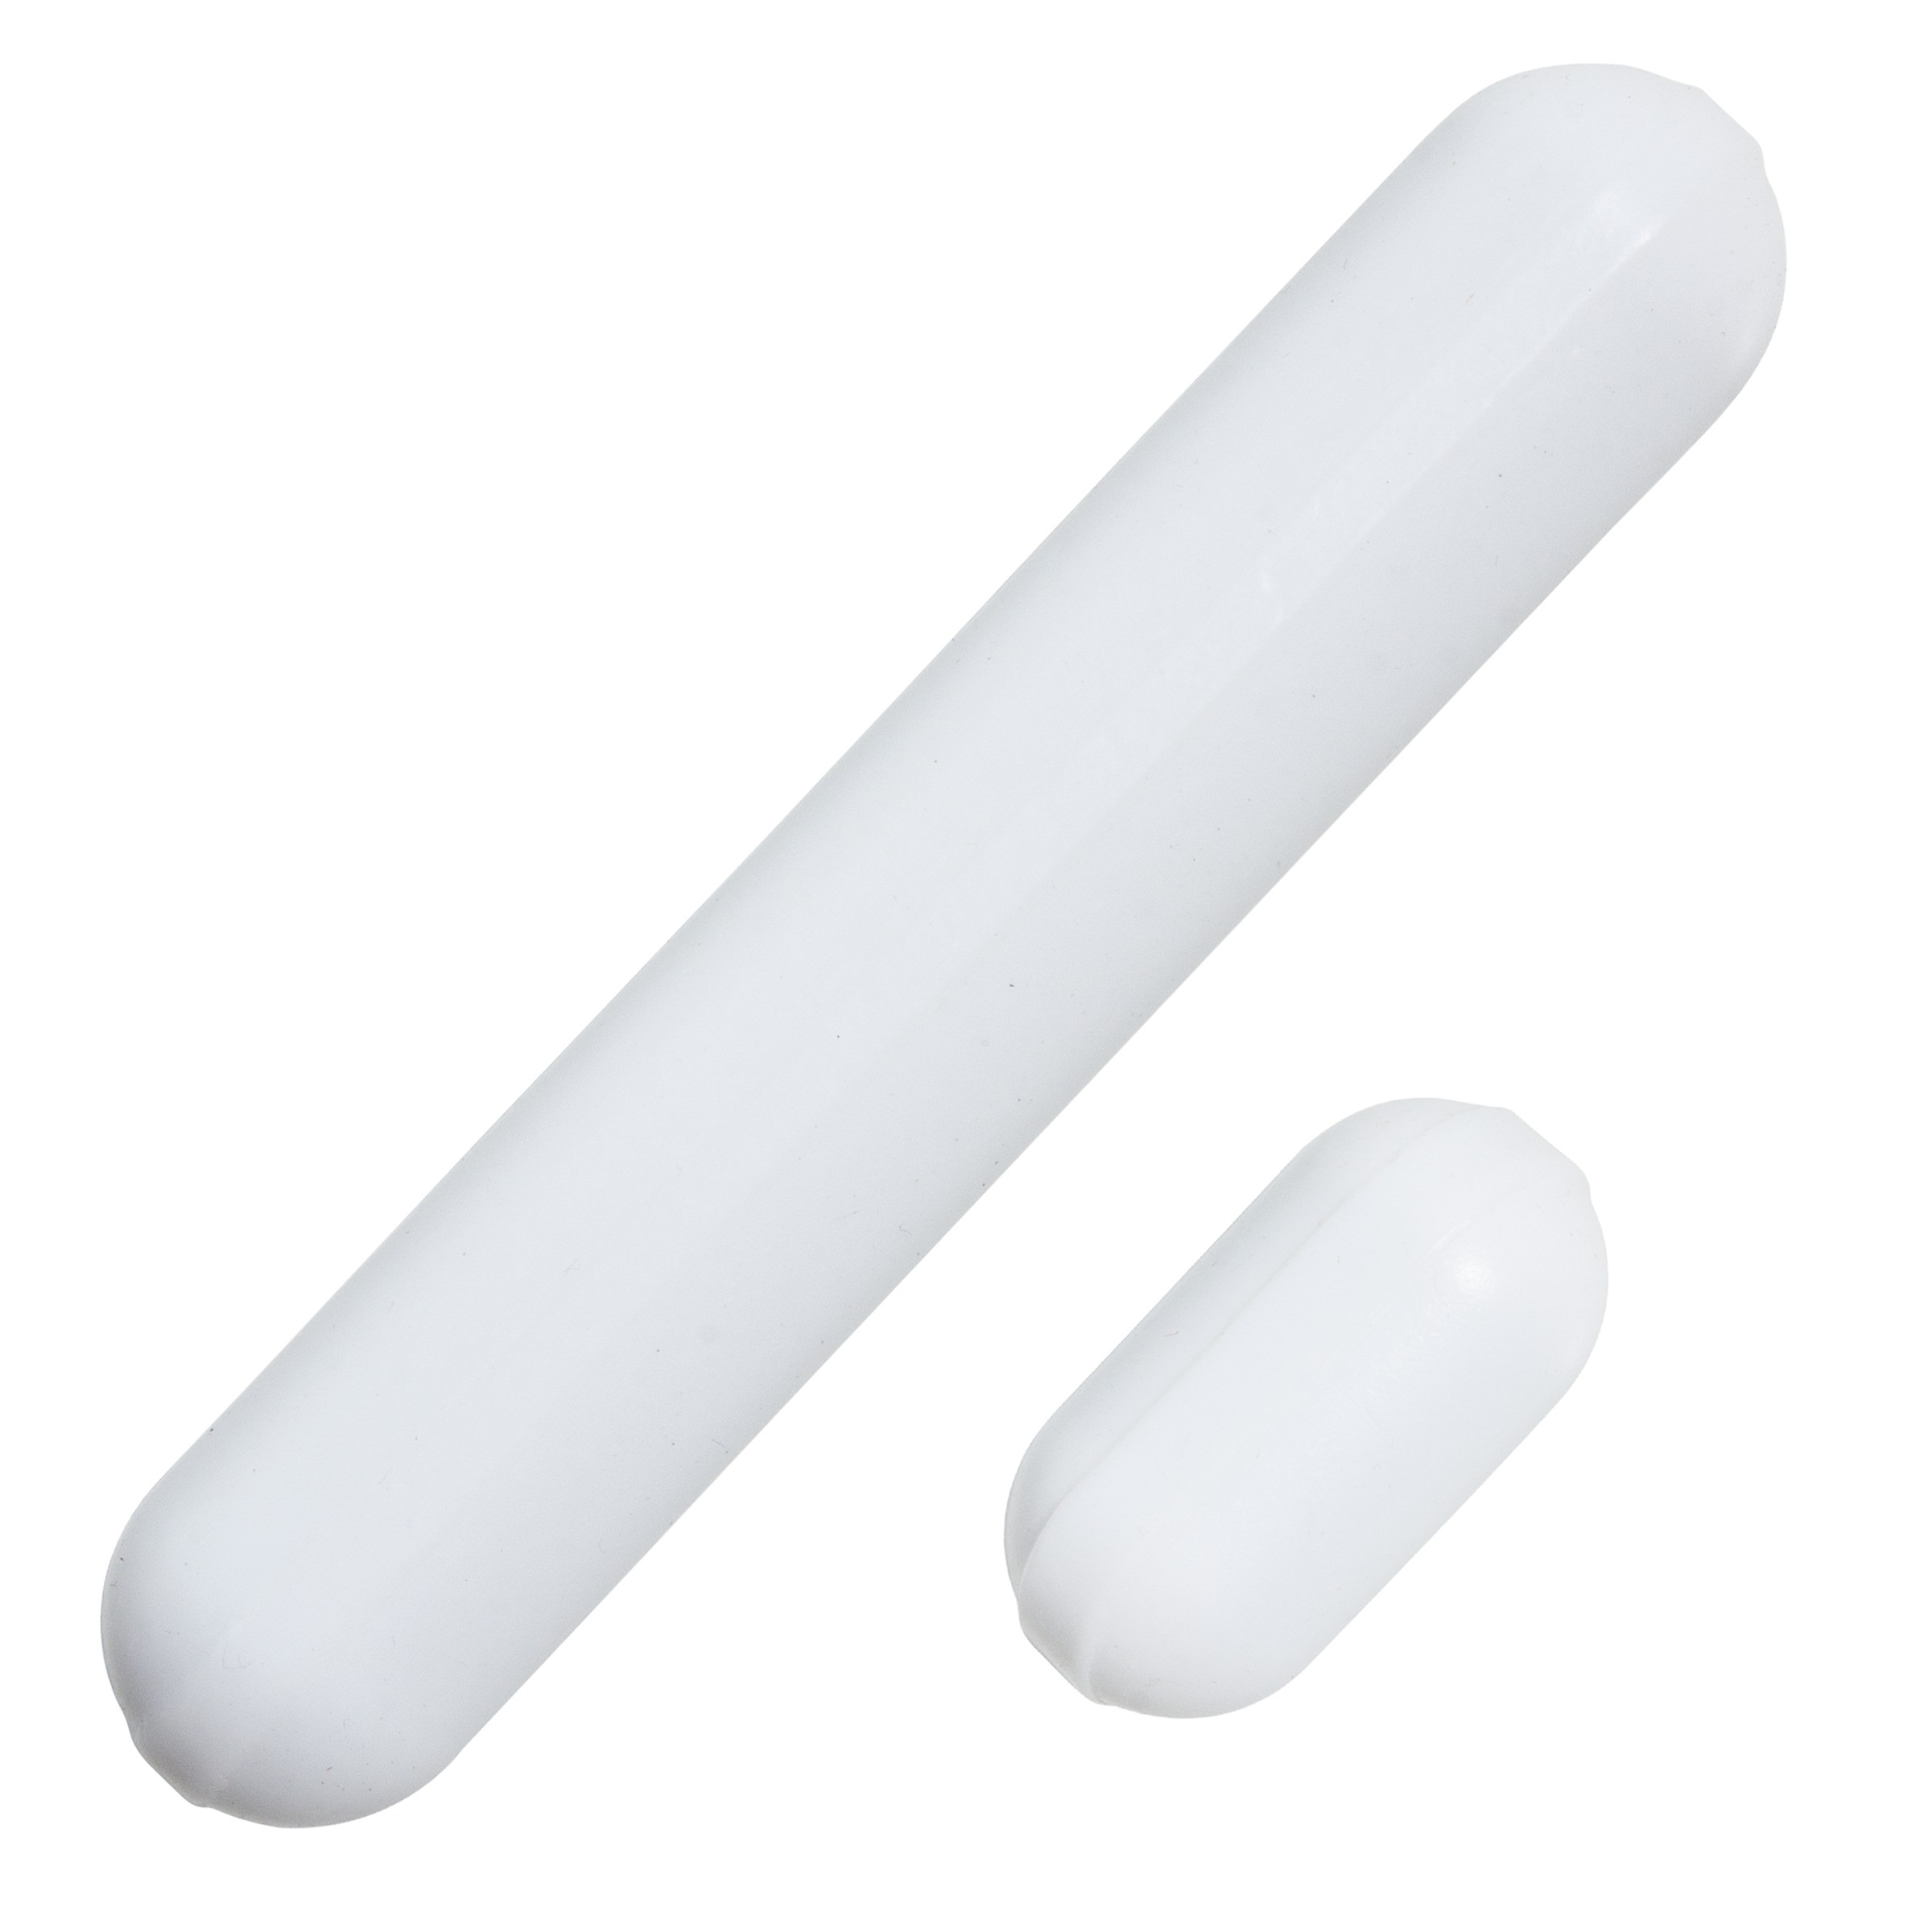 BIPEE 7x40mm Plain Magnetic Stir Bars White Without Pivot Ring PTFE Cover Stirring Rod Pack of 10 